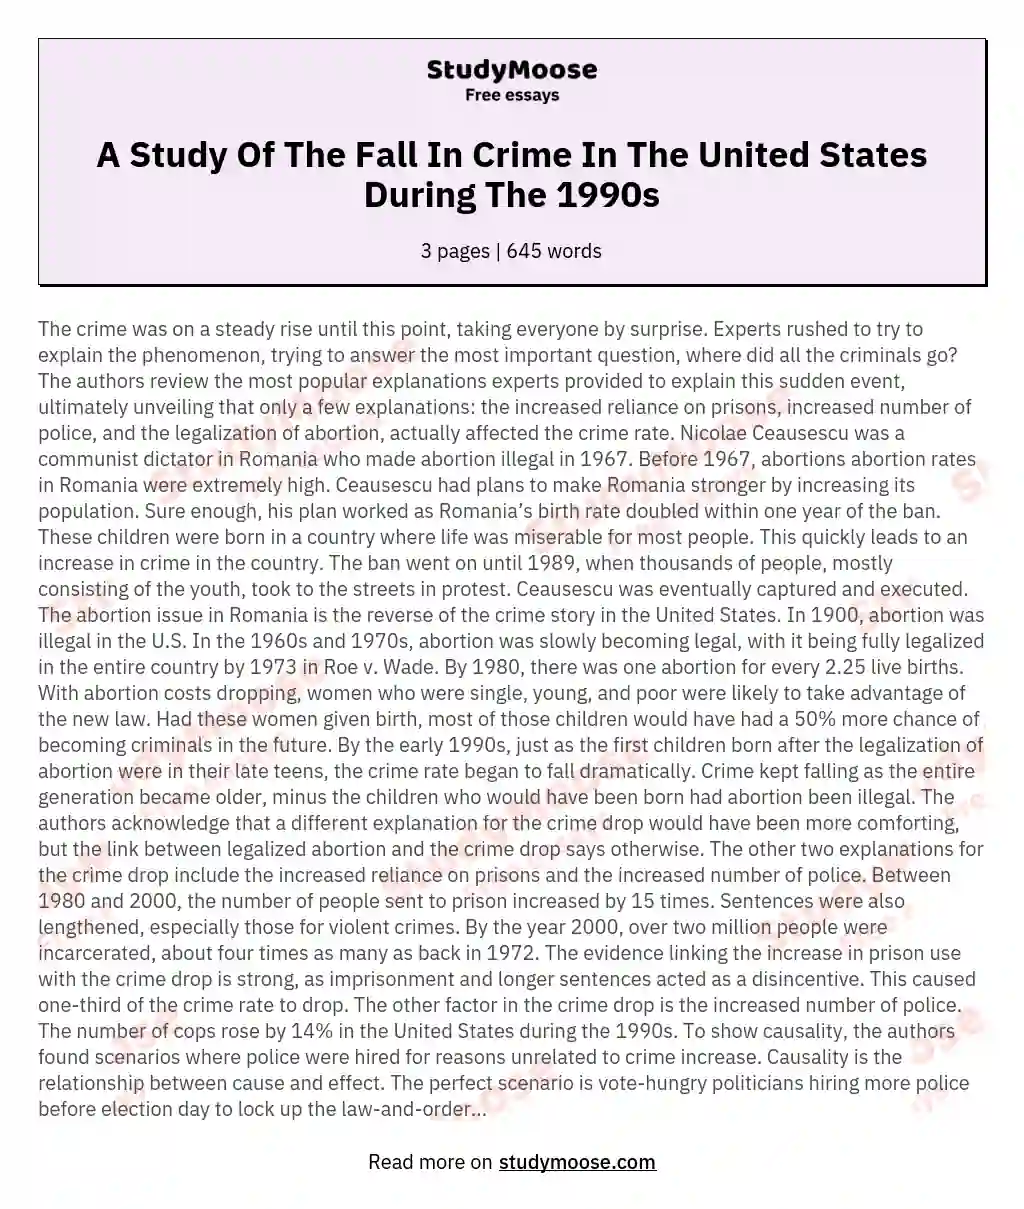 A Study Of The Fall In Crime In The United States During The 1990s essay